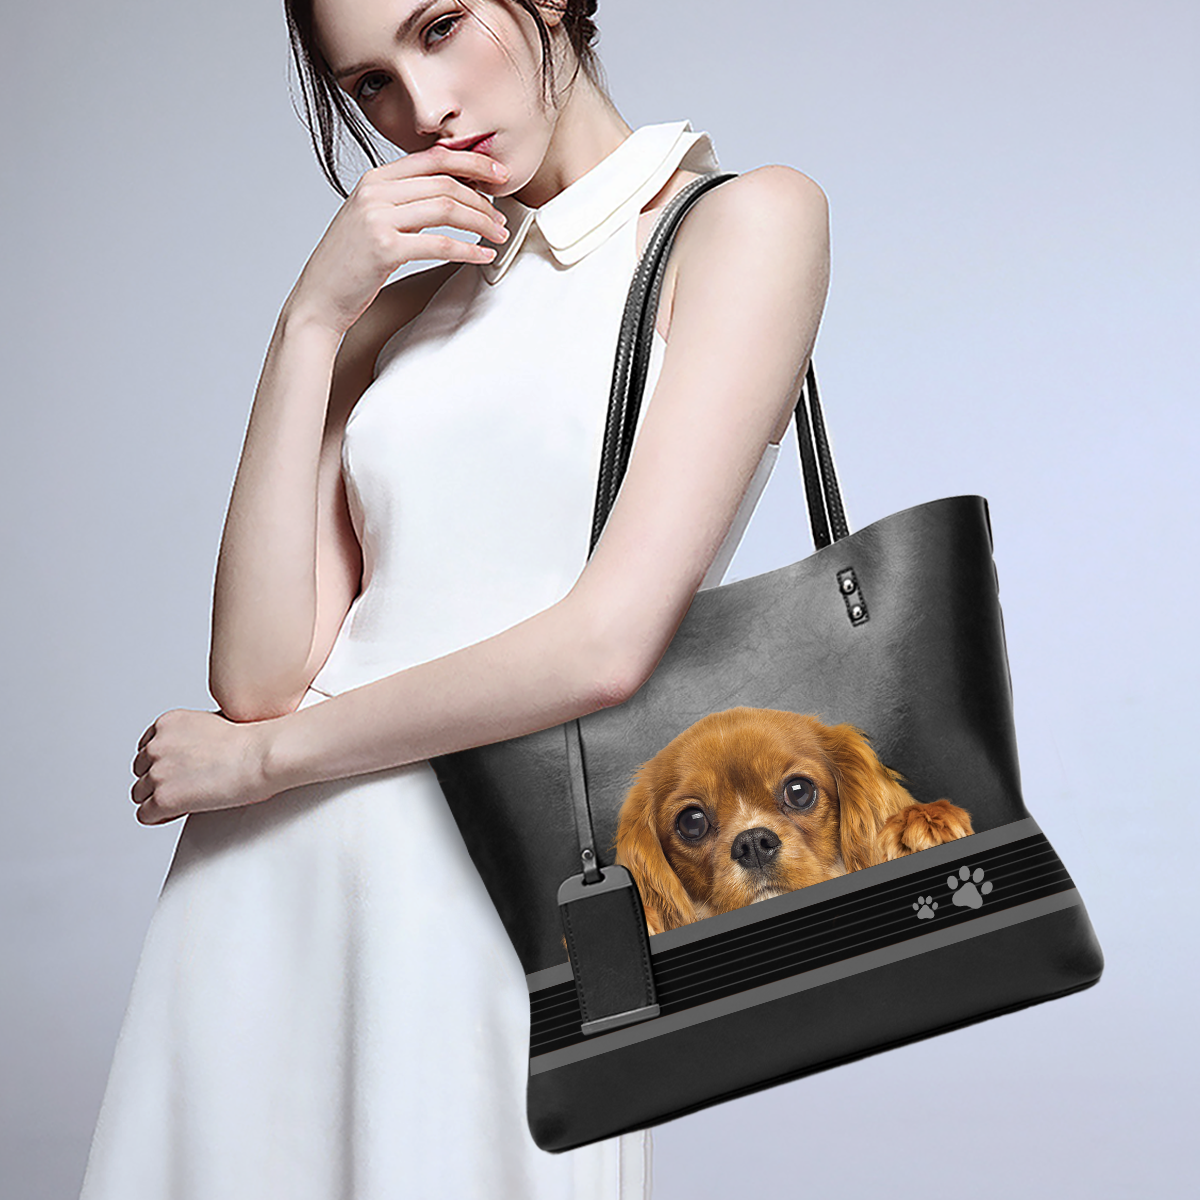 Can You See - Cavalier King Charles Spaniel Glamour Handtasche V1